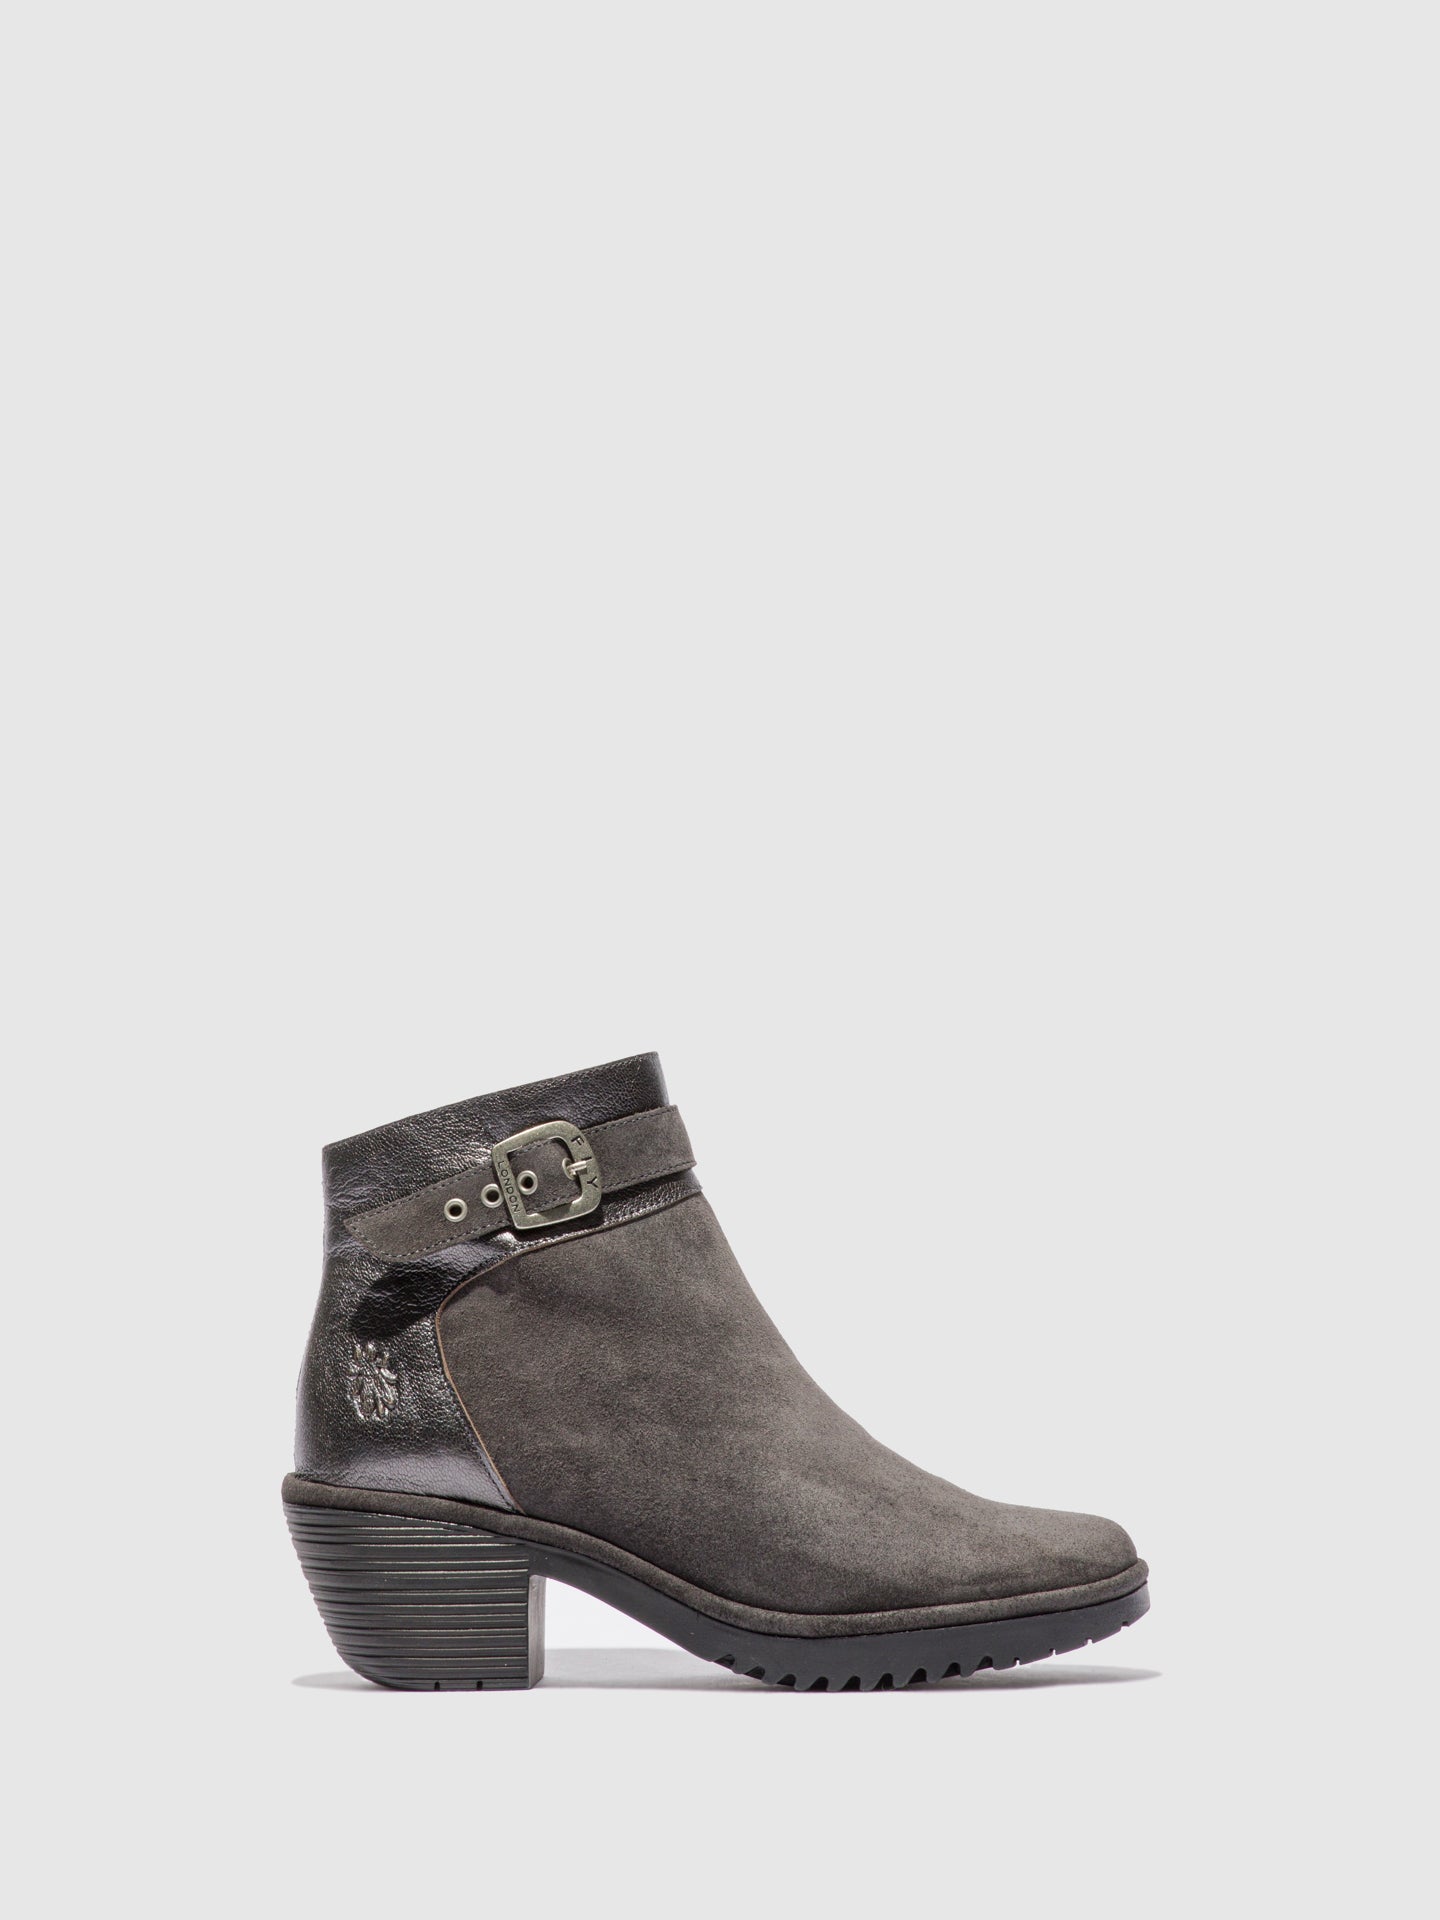 Fly London Buckle Ankle Boots WISP342FLY OILSUEDE/IDRA DIESEL/GRAPHITE